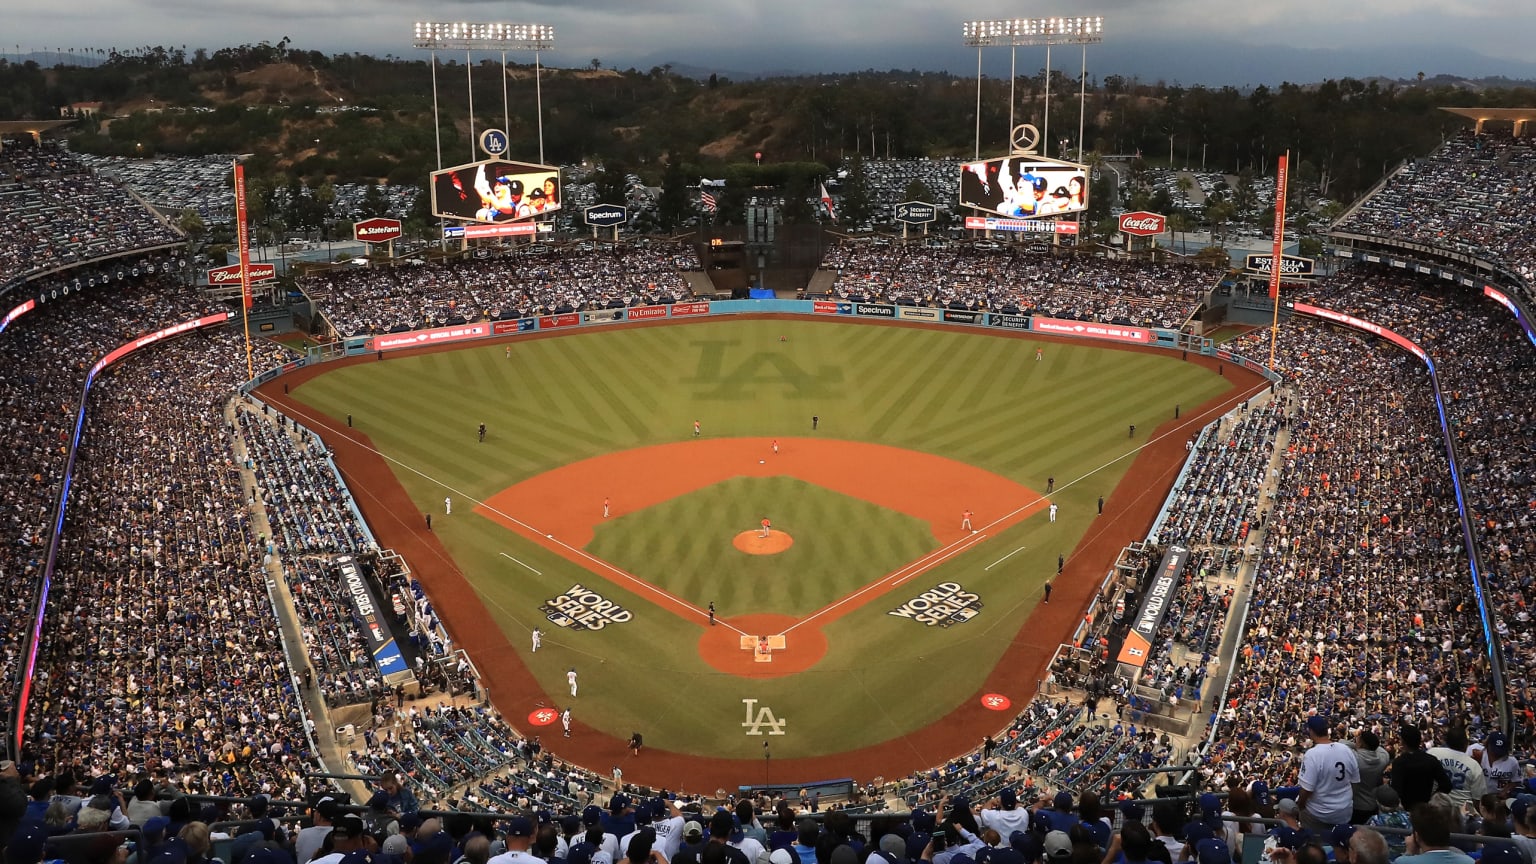 Dodger Stadium vs. Angels Stadium: From an East Coast Perspective